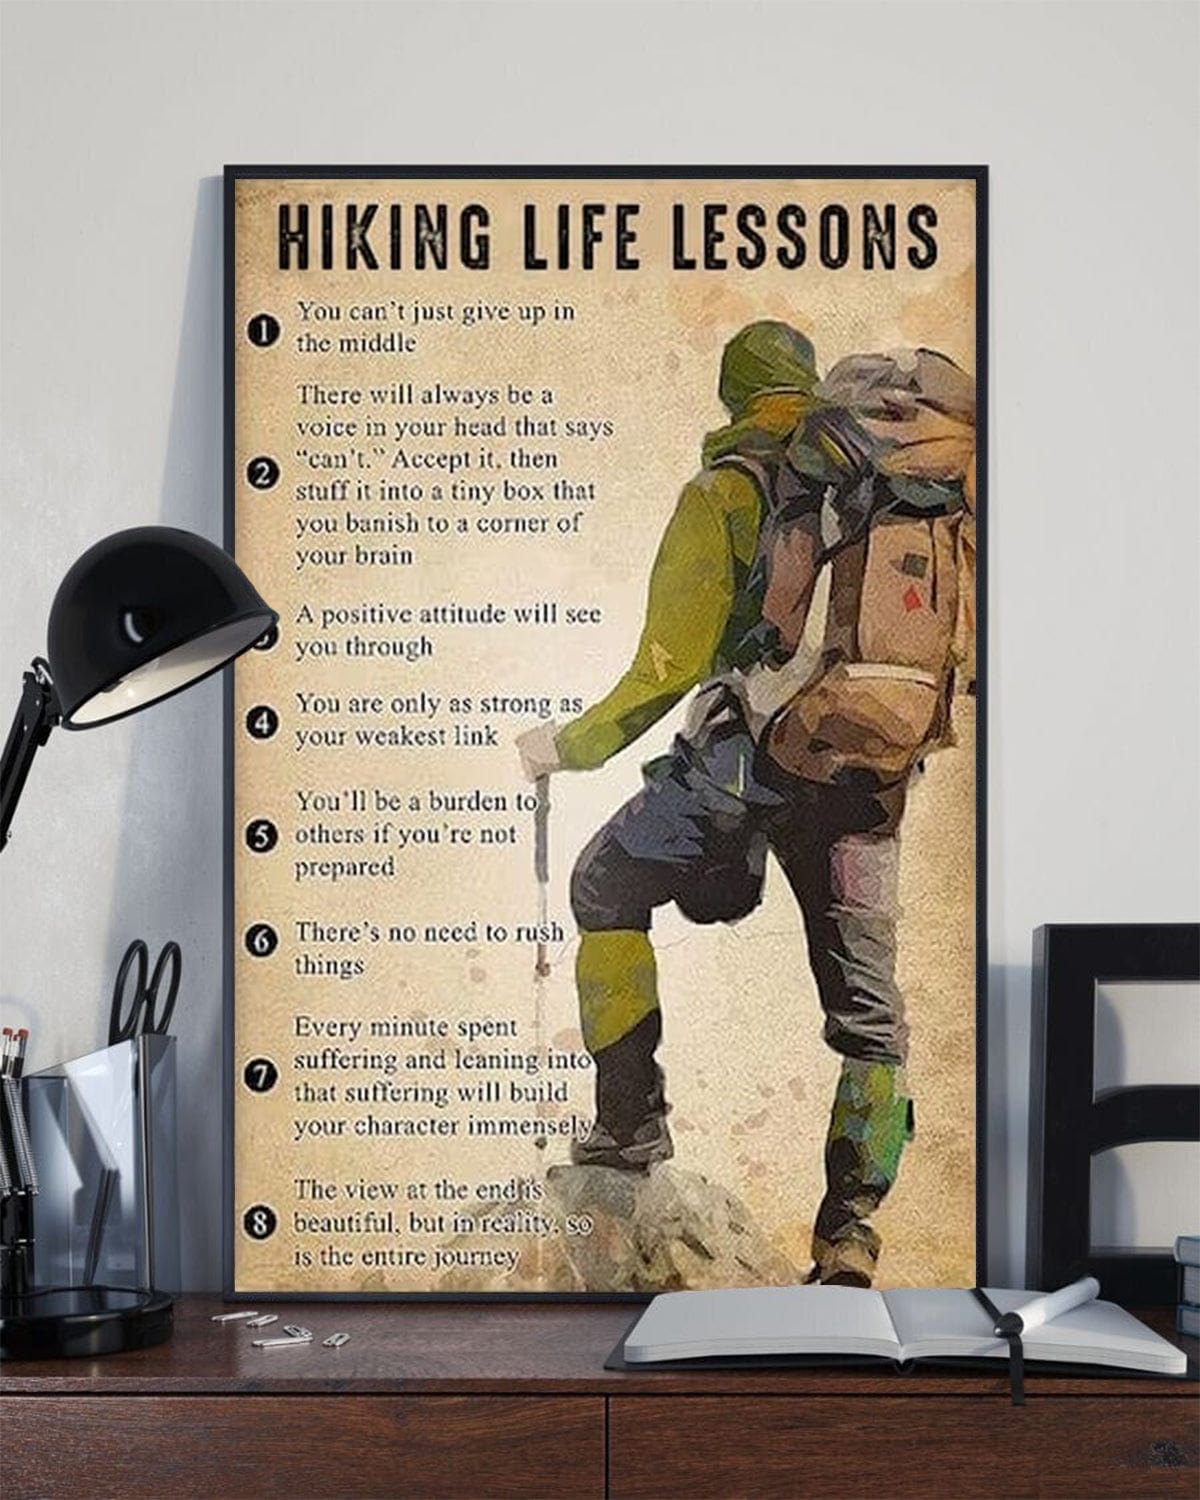 Hiking Life Lessons Poster, Canvas